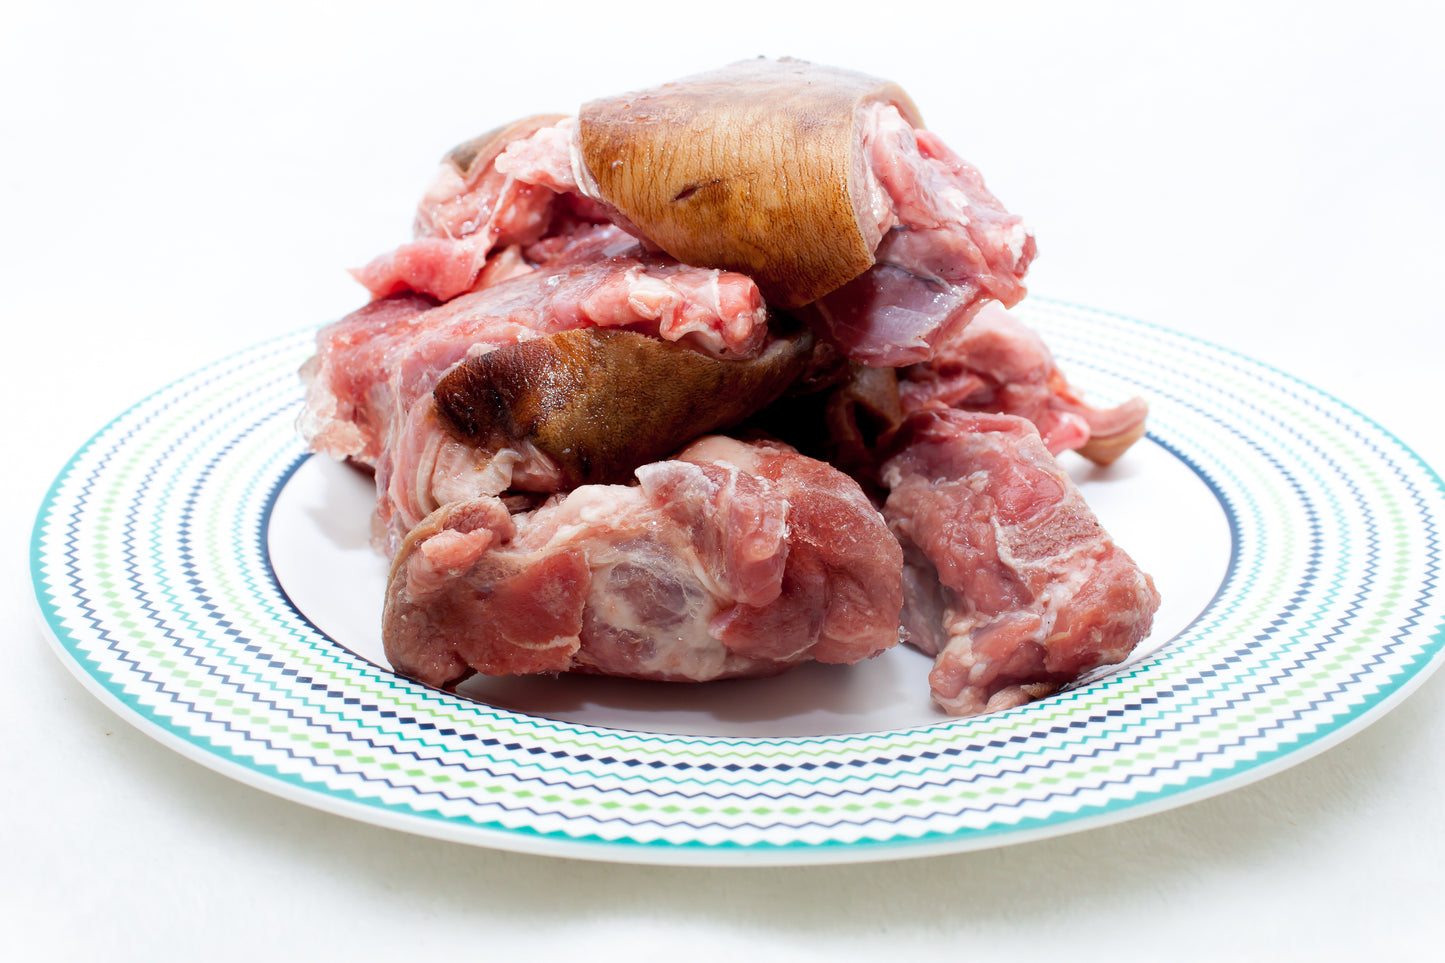 Fresh Goat Meat with Skin